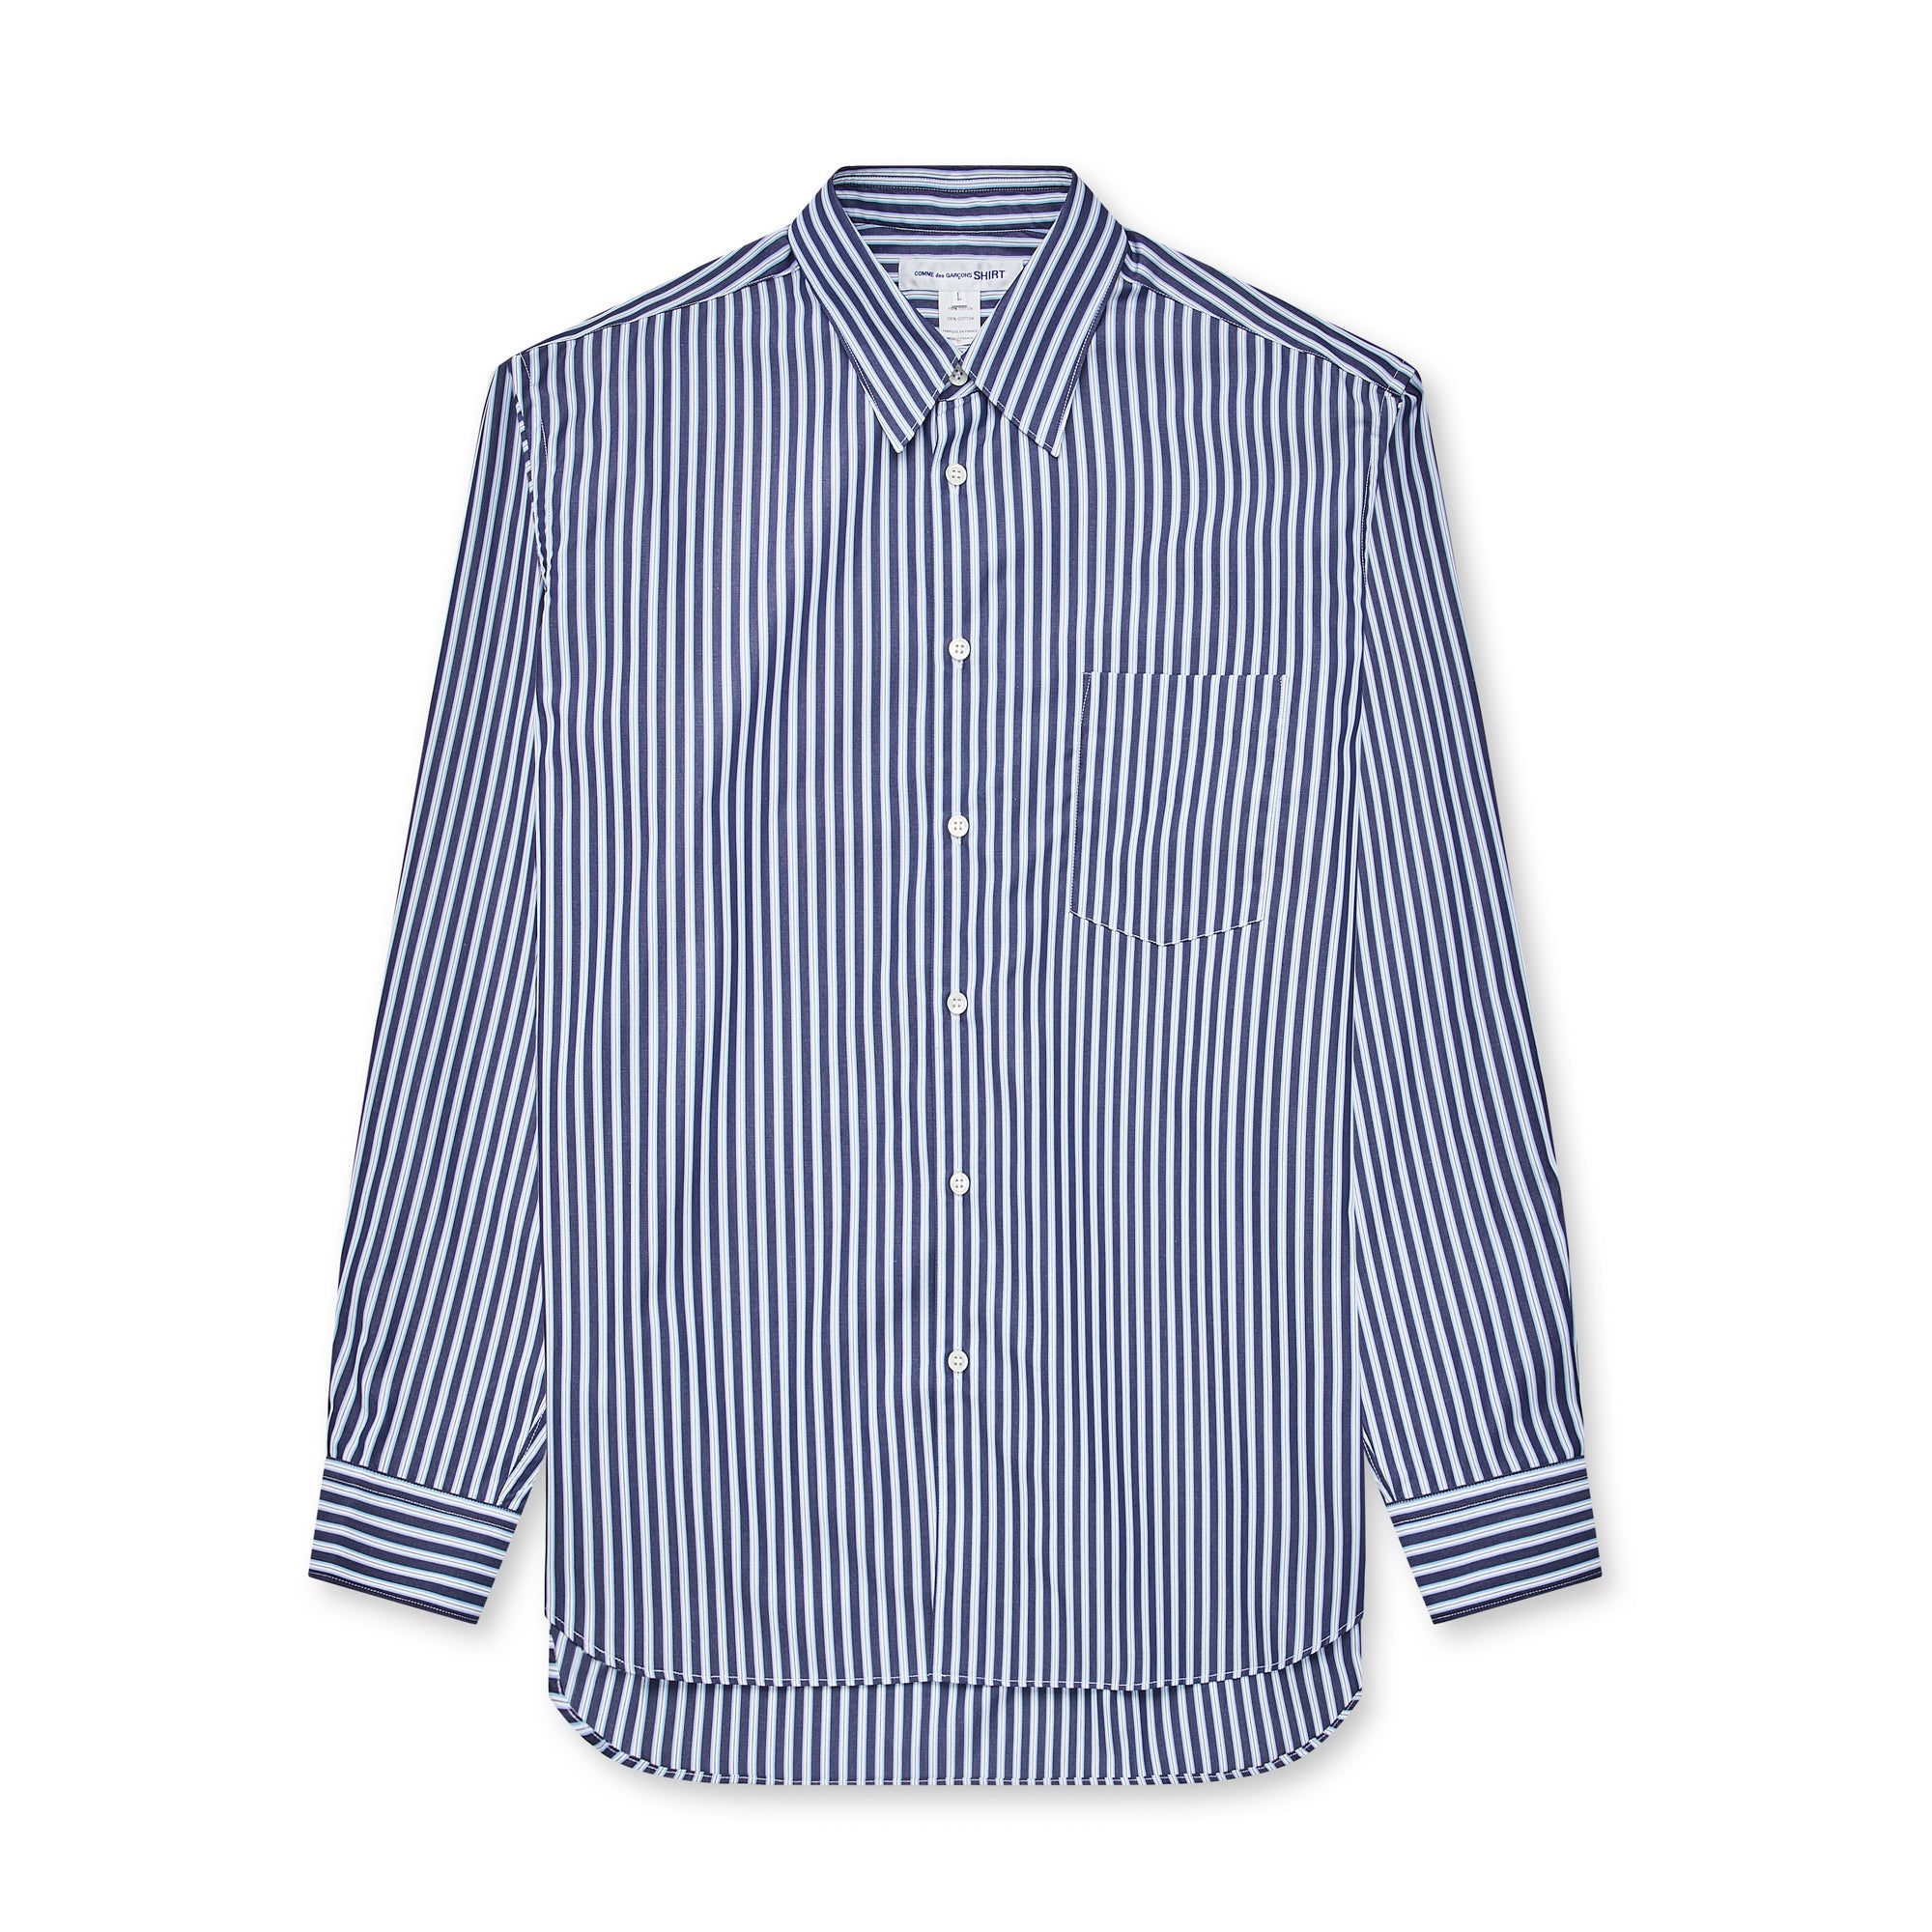 CDG Shirt Forever - Wide Fit Cotton Shirt - (Stripe 3) view 5